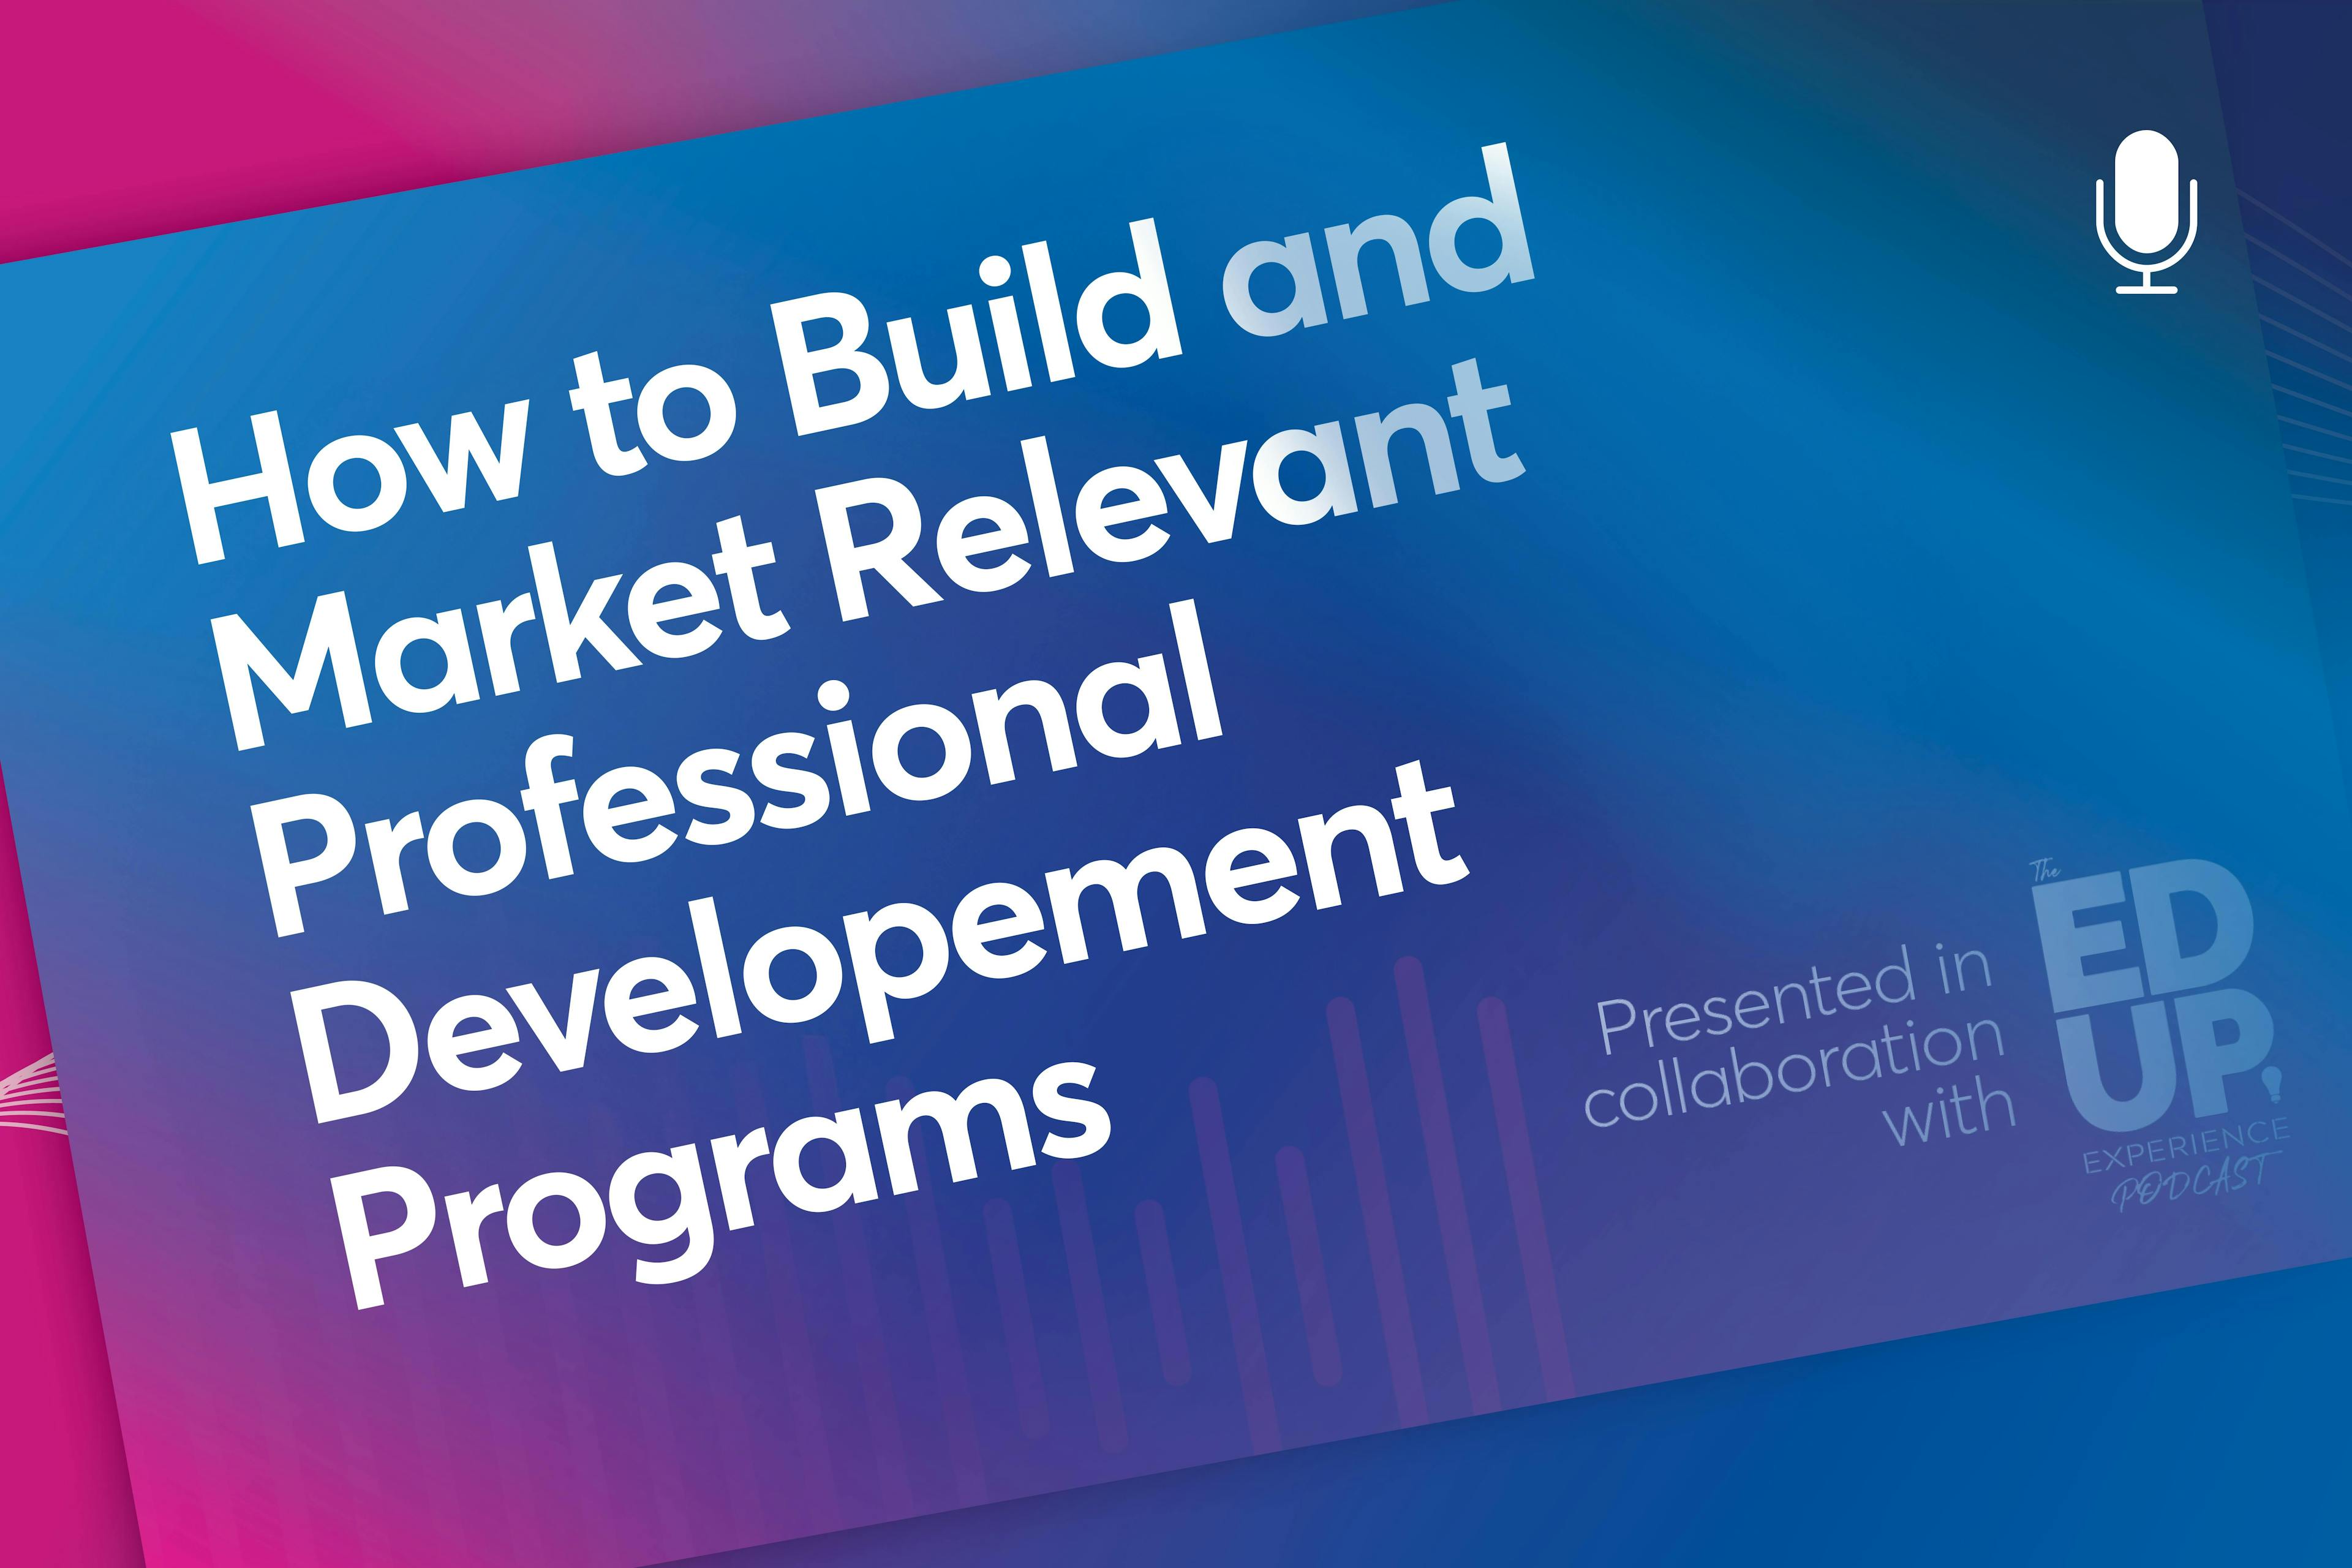 How to Build and Market Relevant Professional Development Programs